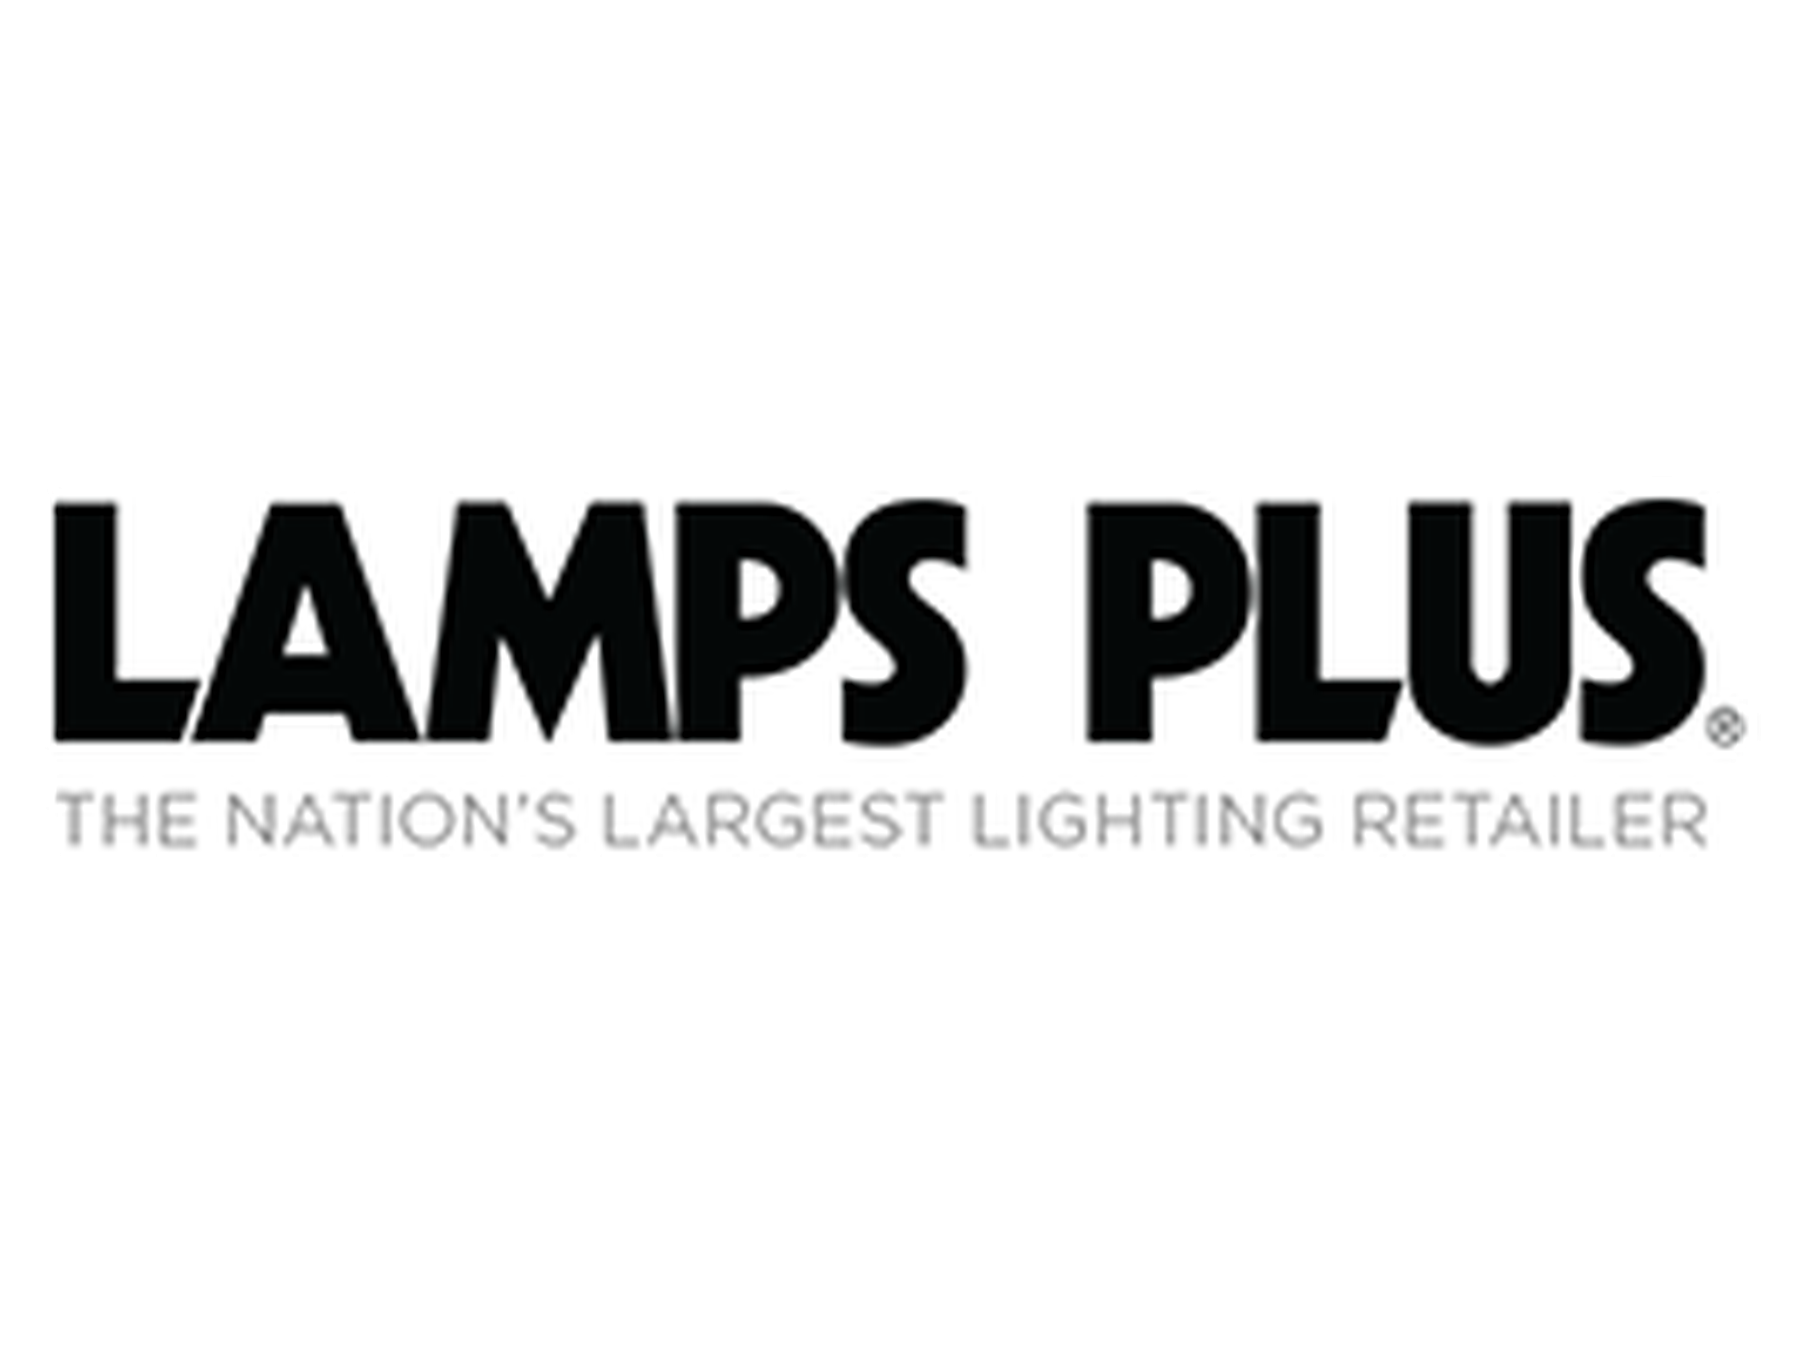 Lamps Plus Coupons